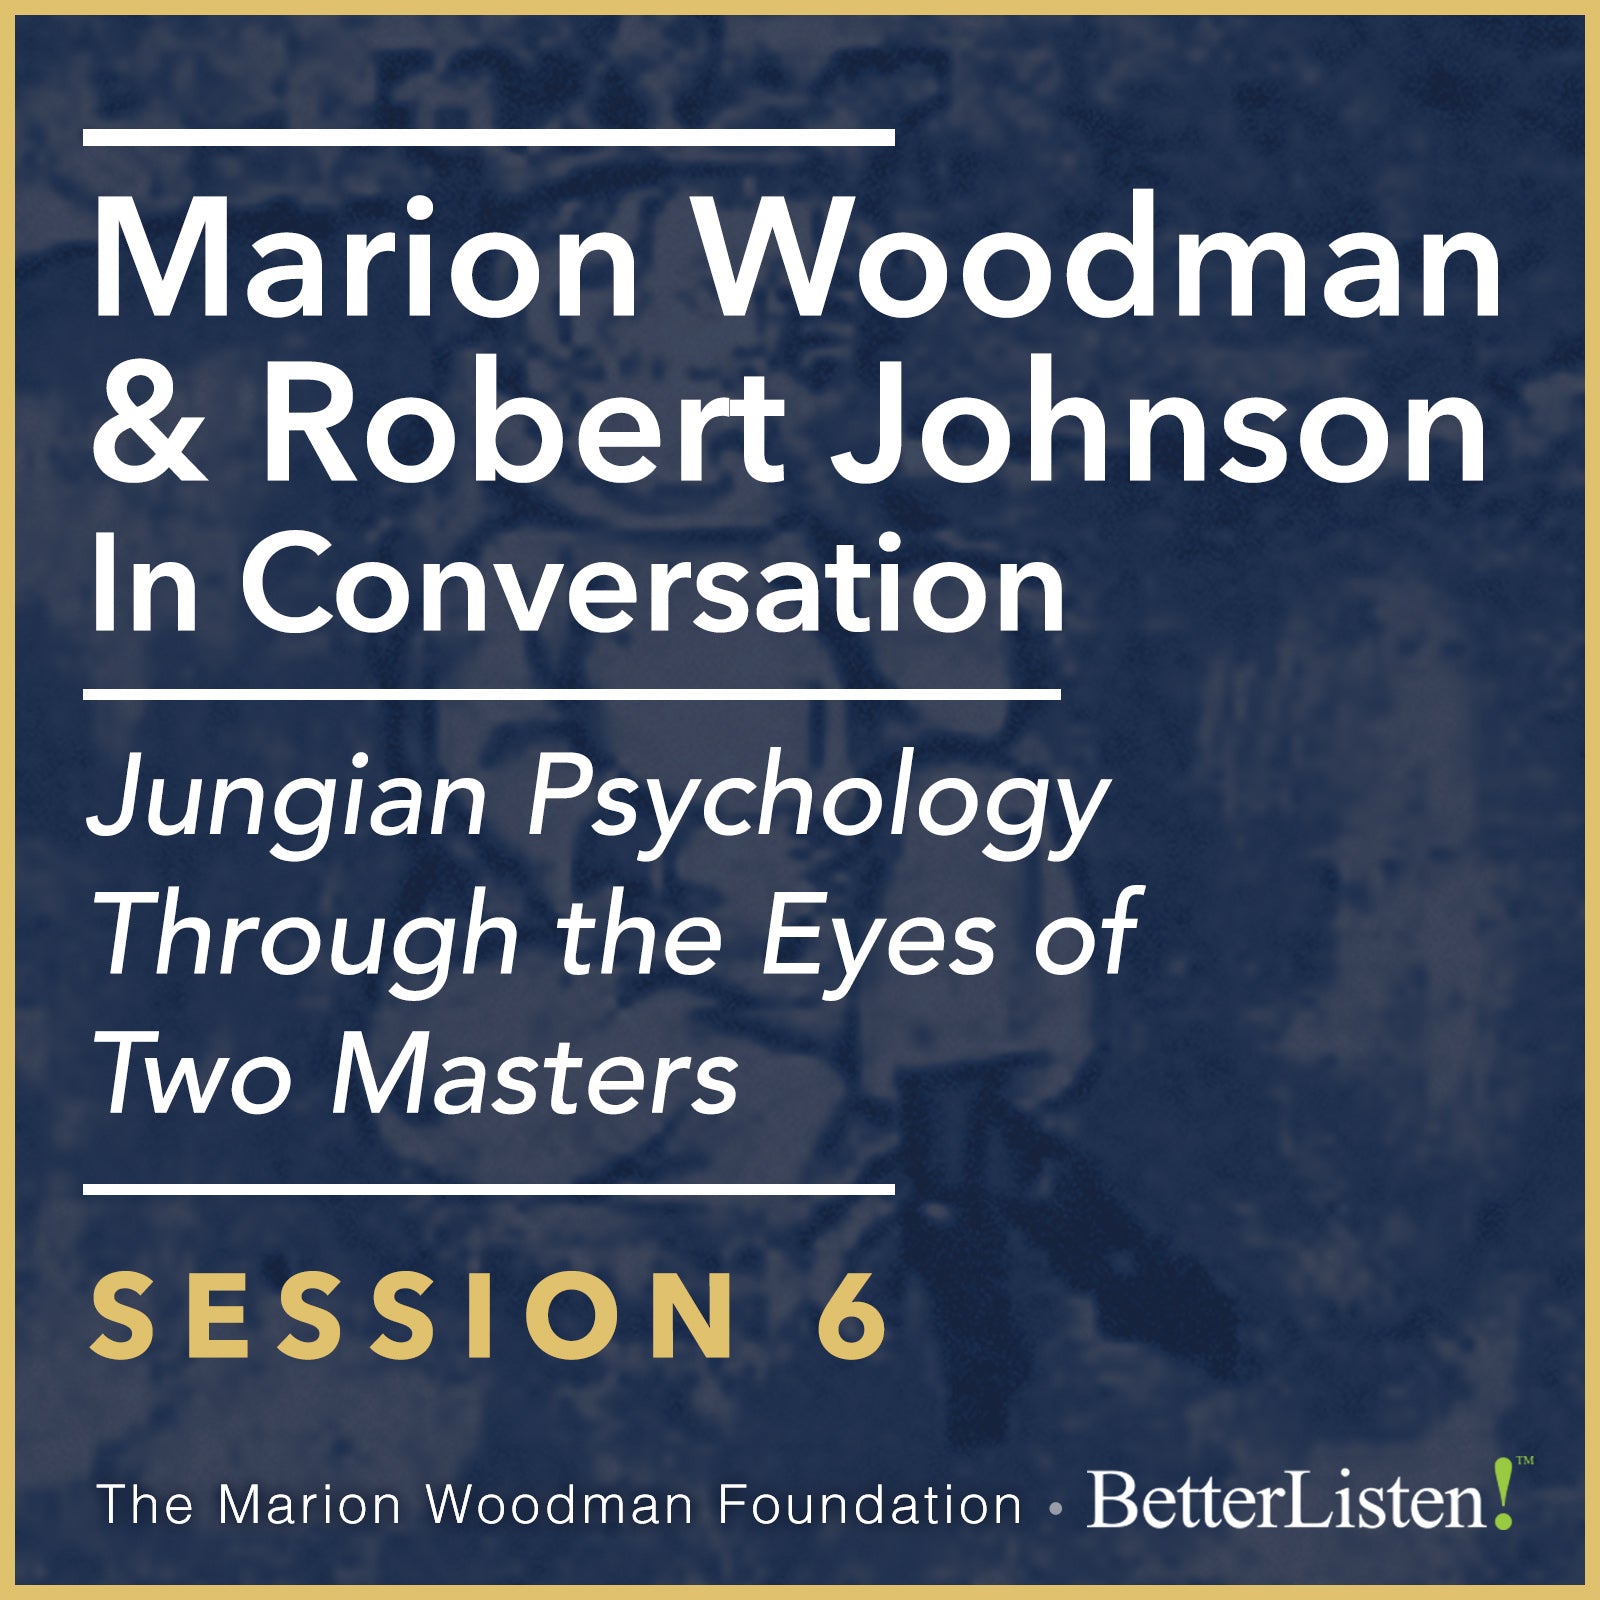 Marion Woodman & Robert Johnson In Conversation: SESSION 6 - Video, Jungian Psychology Through The Eyes of Two Masters